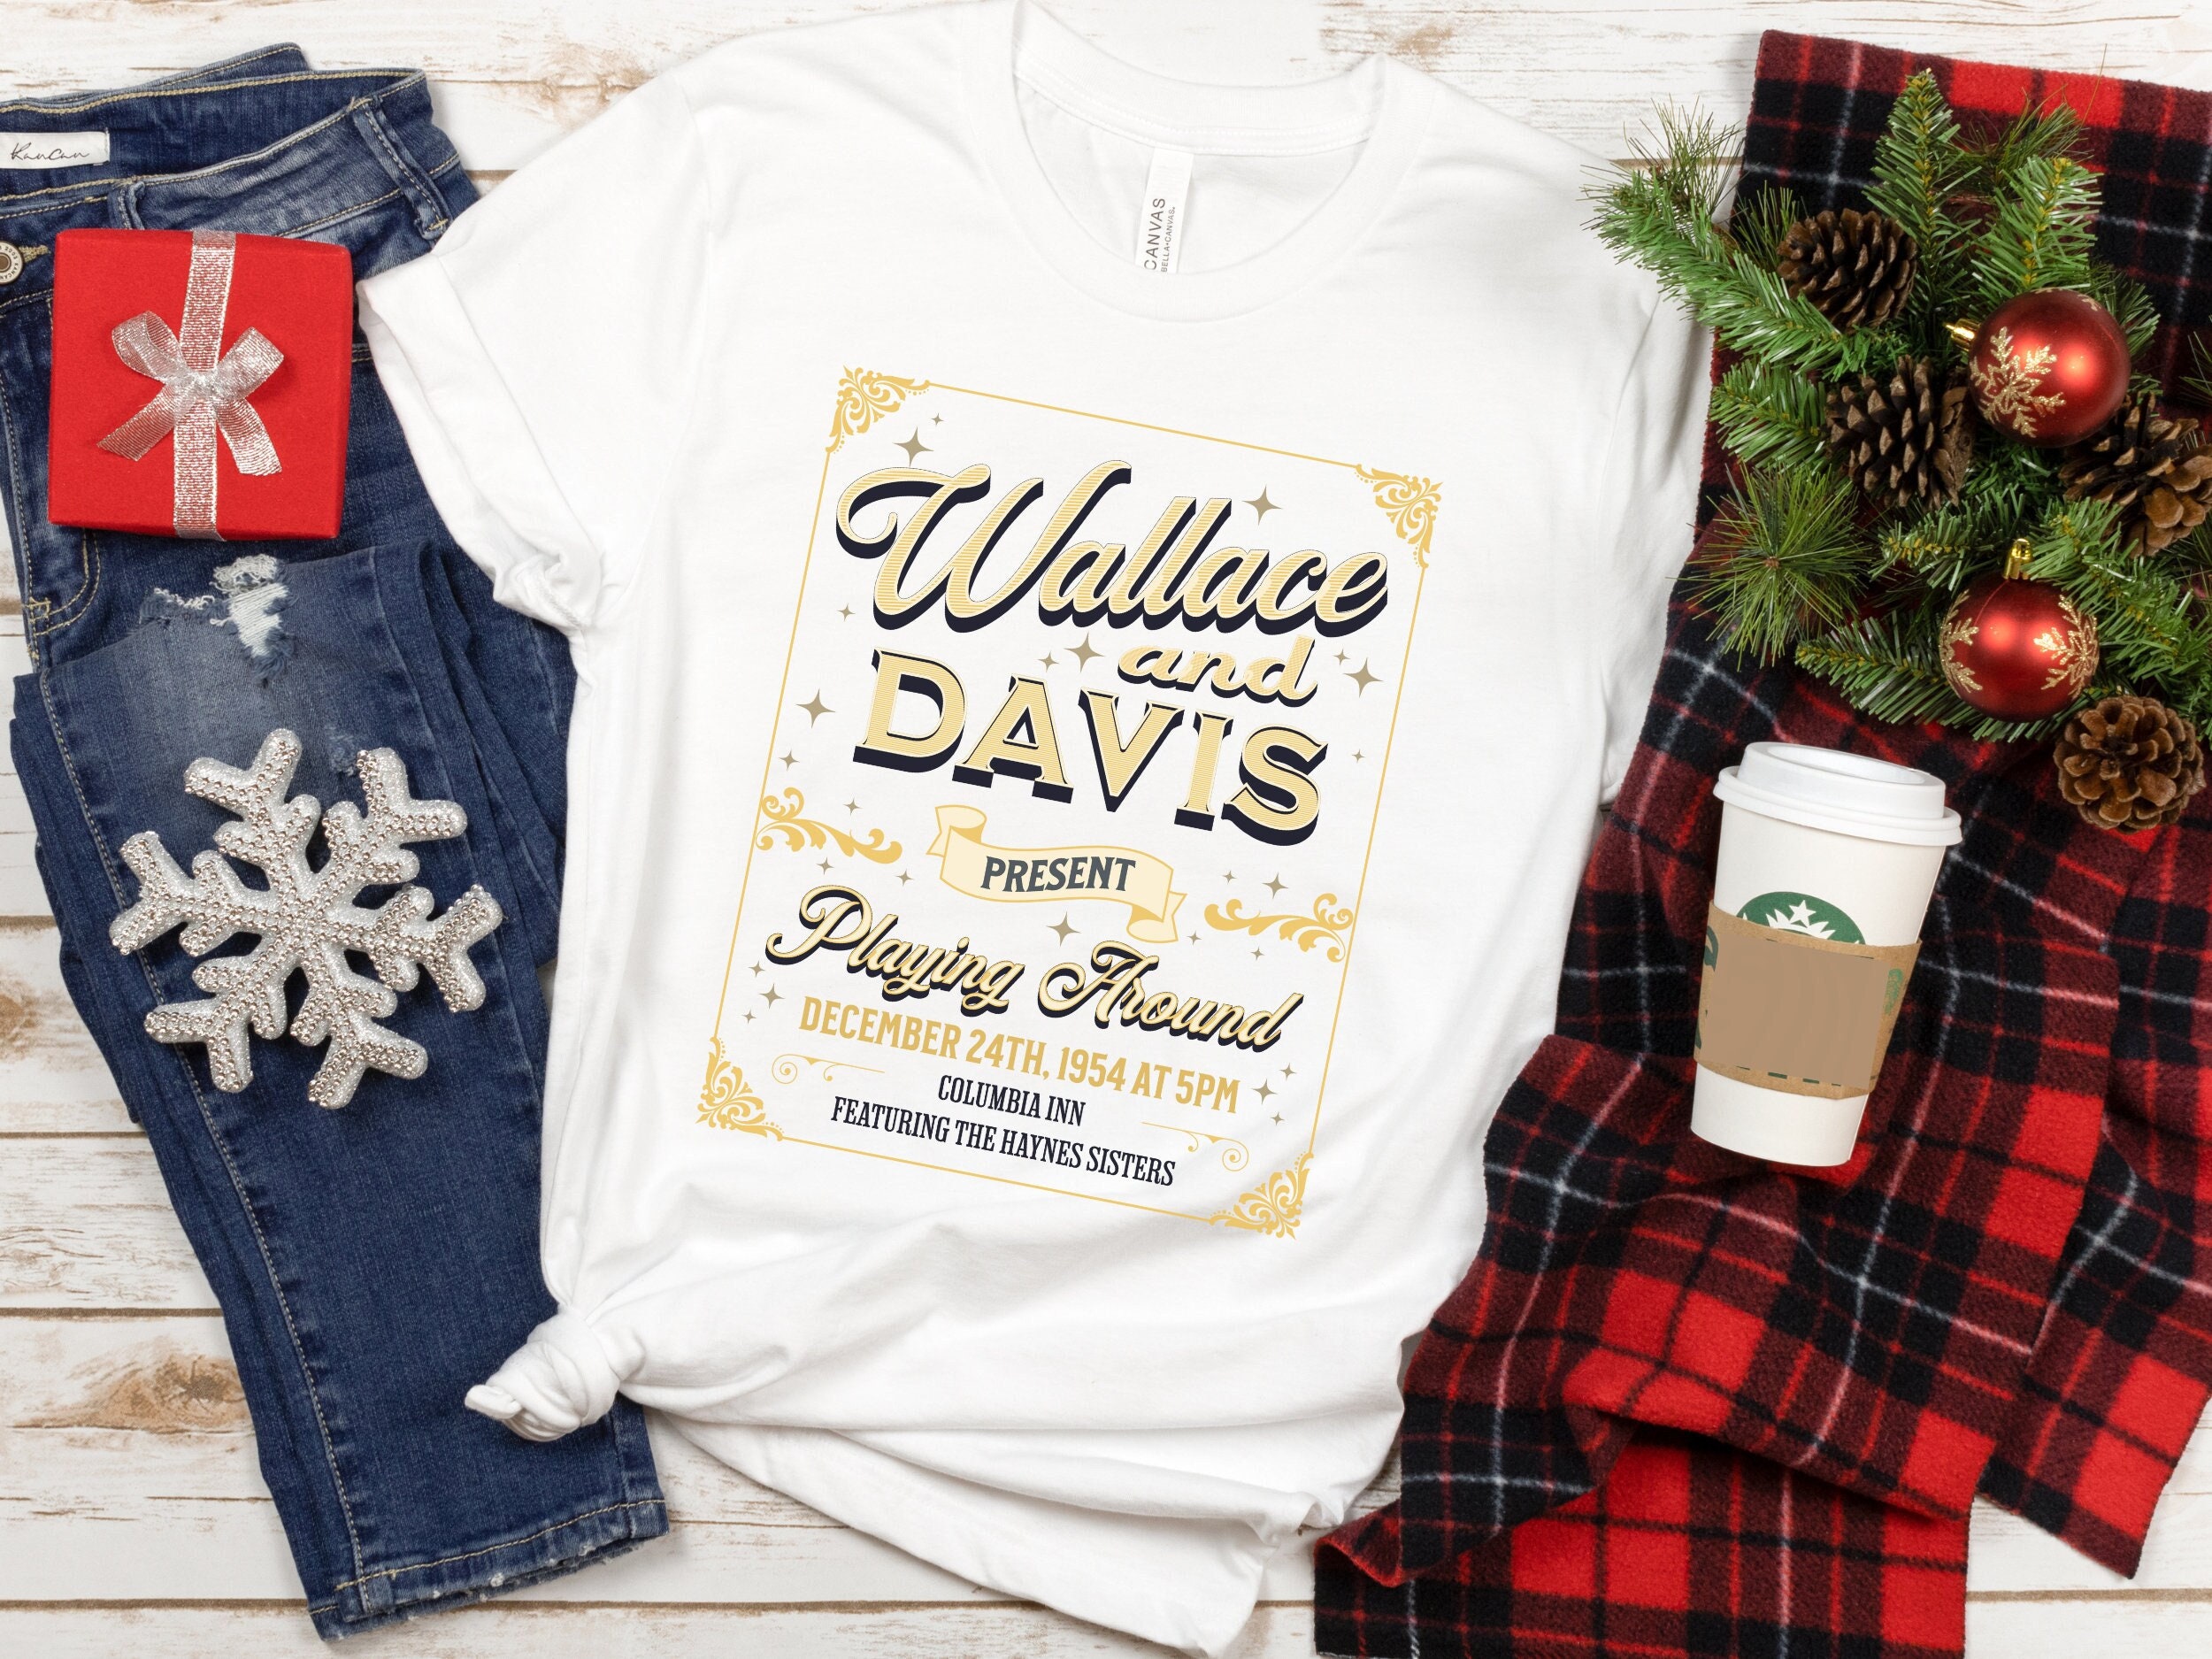 Discover Wallace and Davis White Christmas Movie T Shirt | Bing Crosby Classic Broadway Show